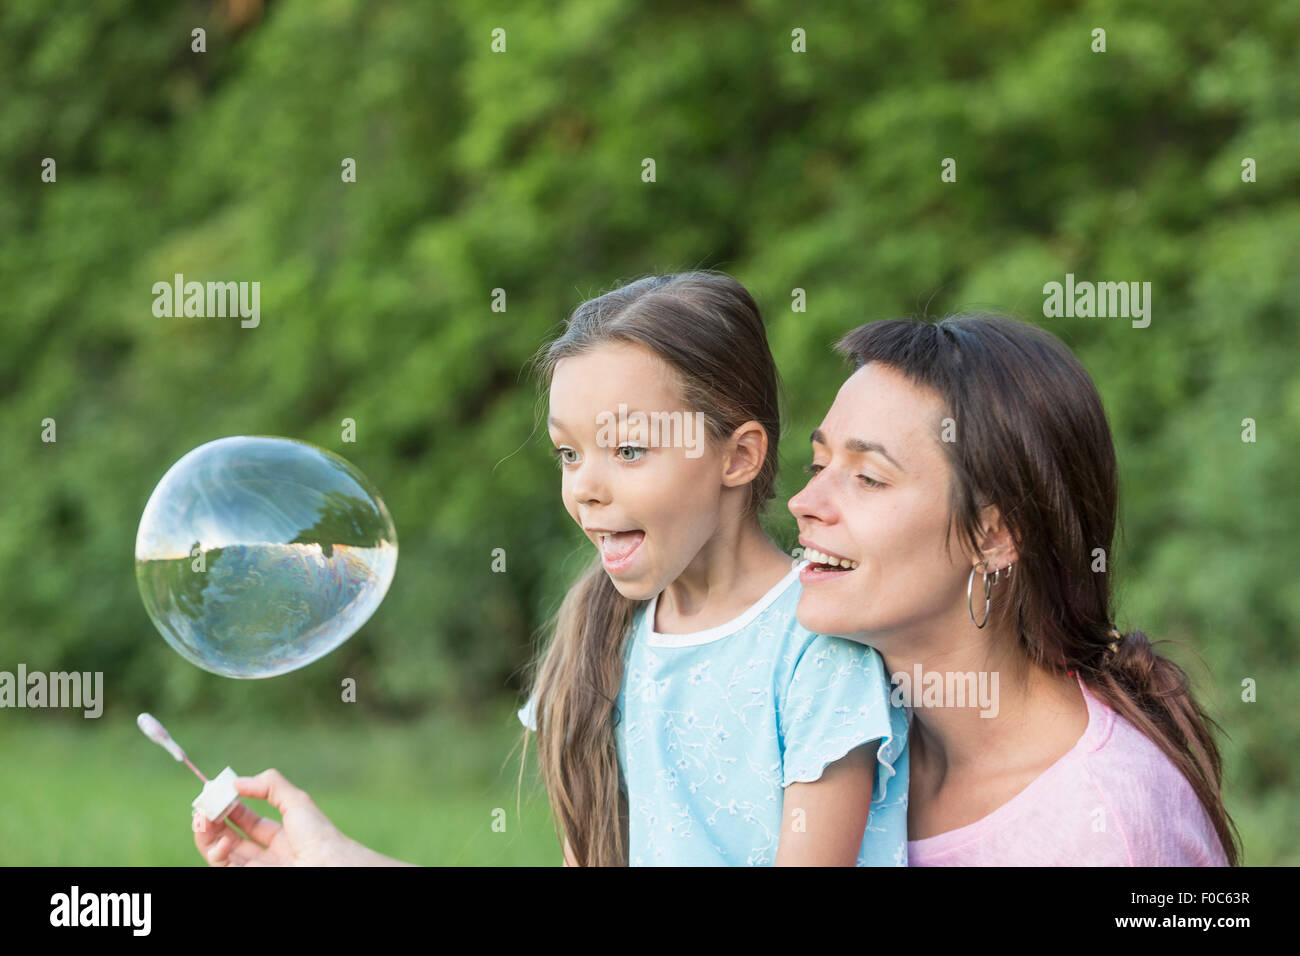 Mother and daughter playing with soap bubble outdoors Stock Photo